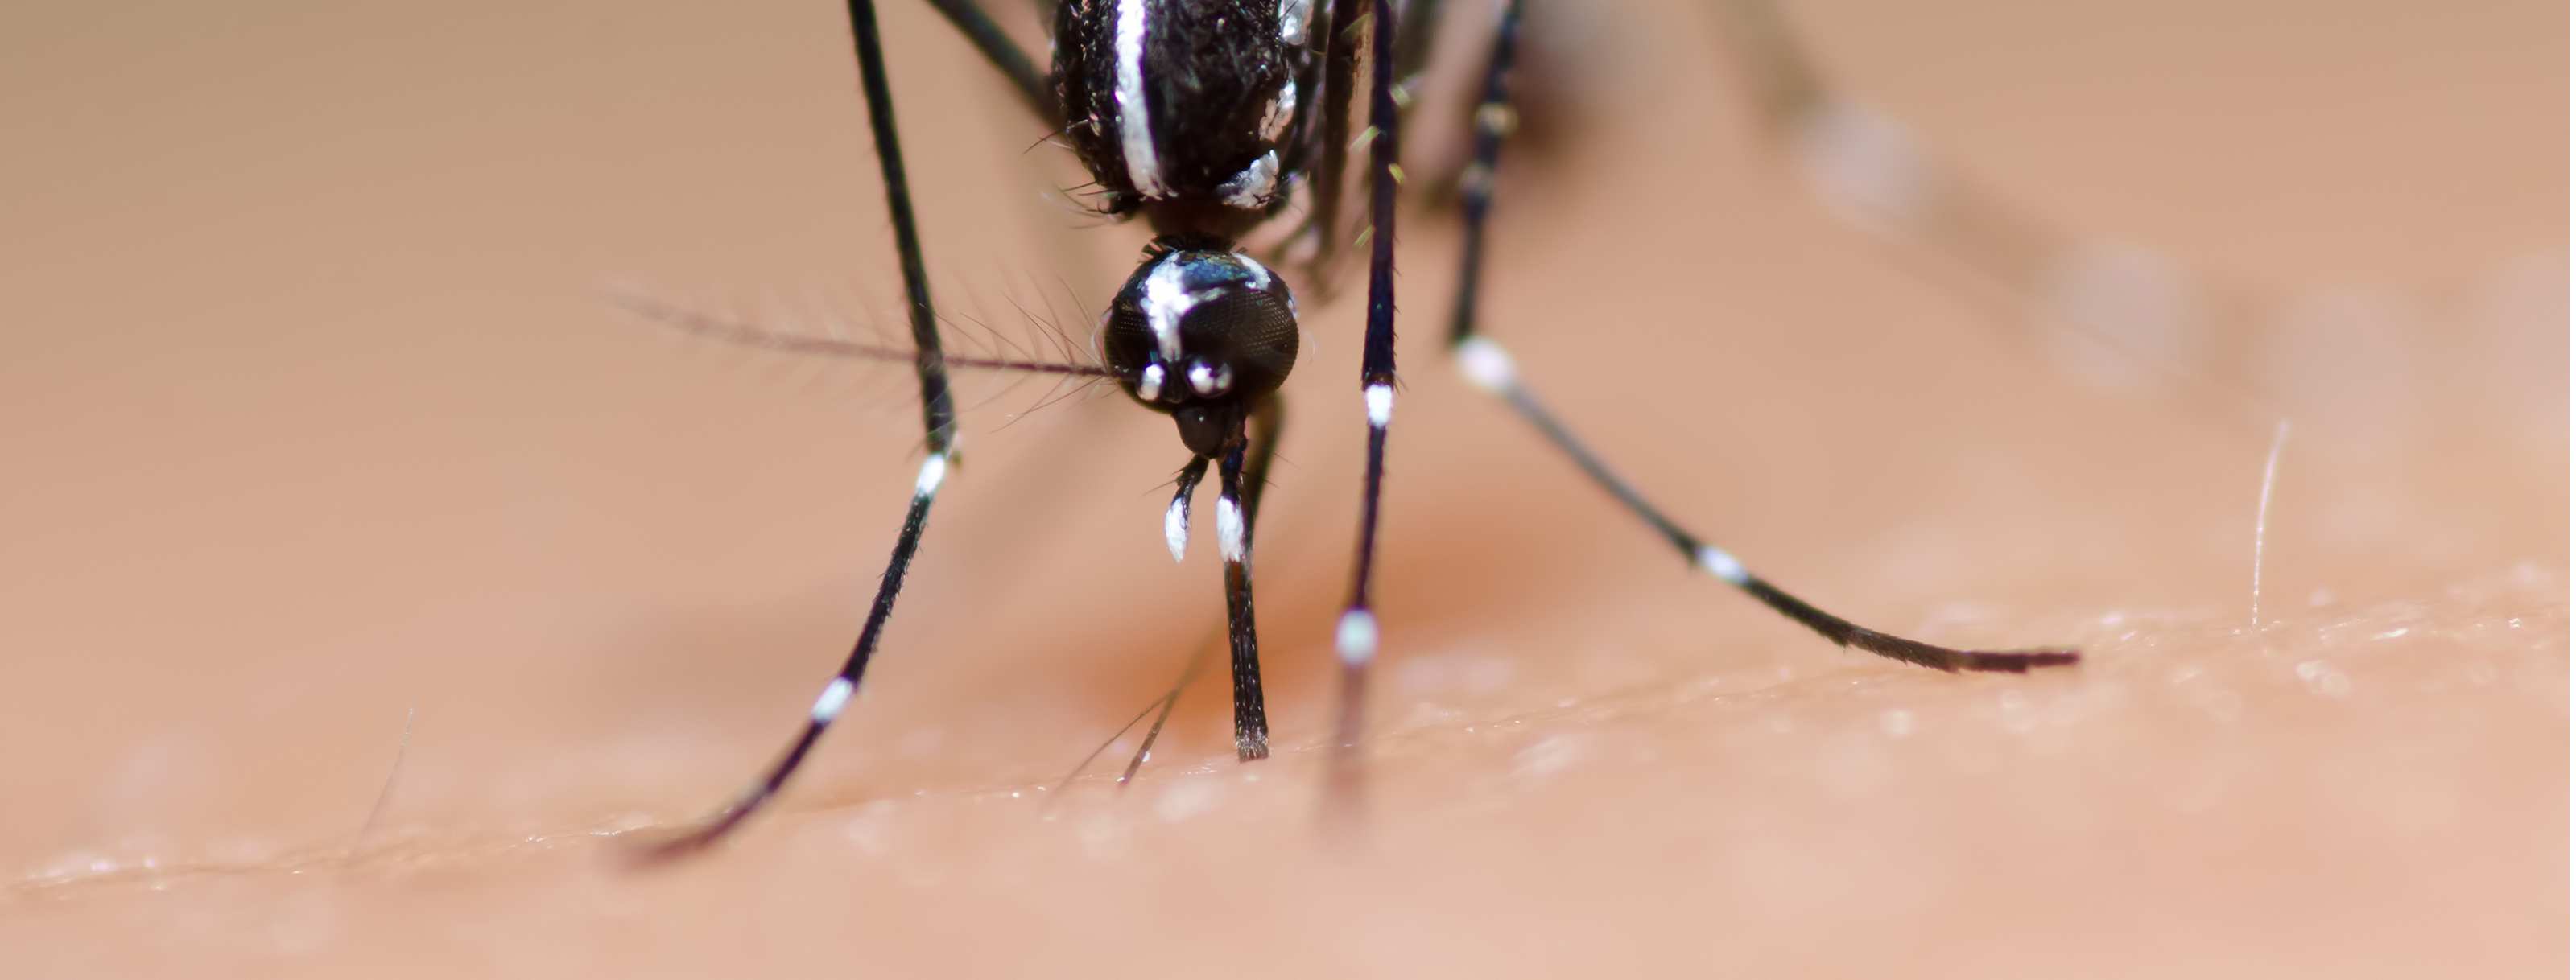 Mosquito Infectious Disease